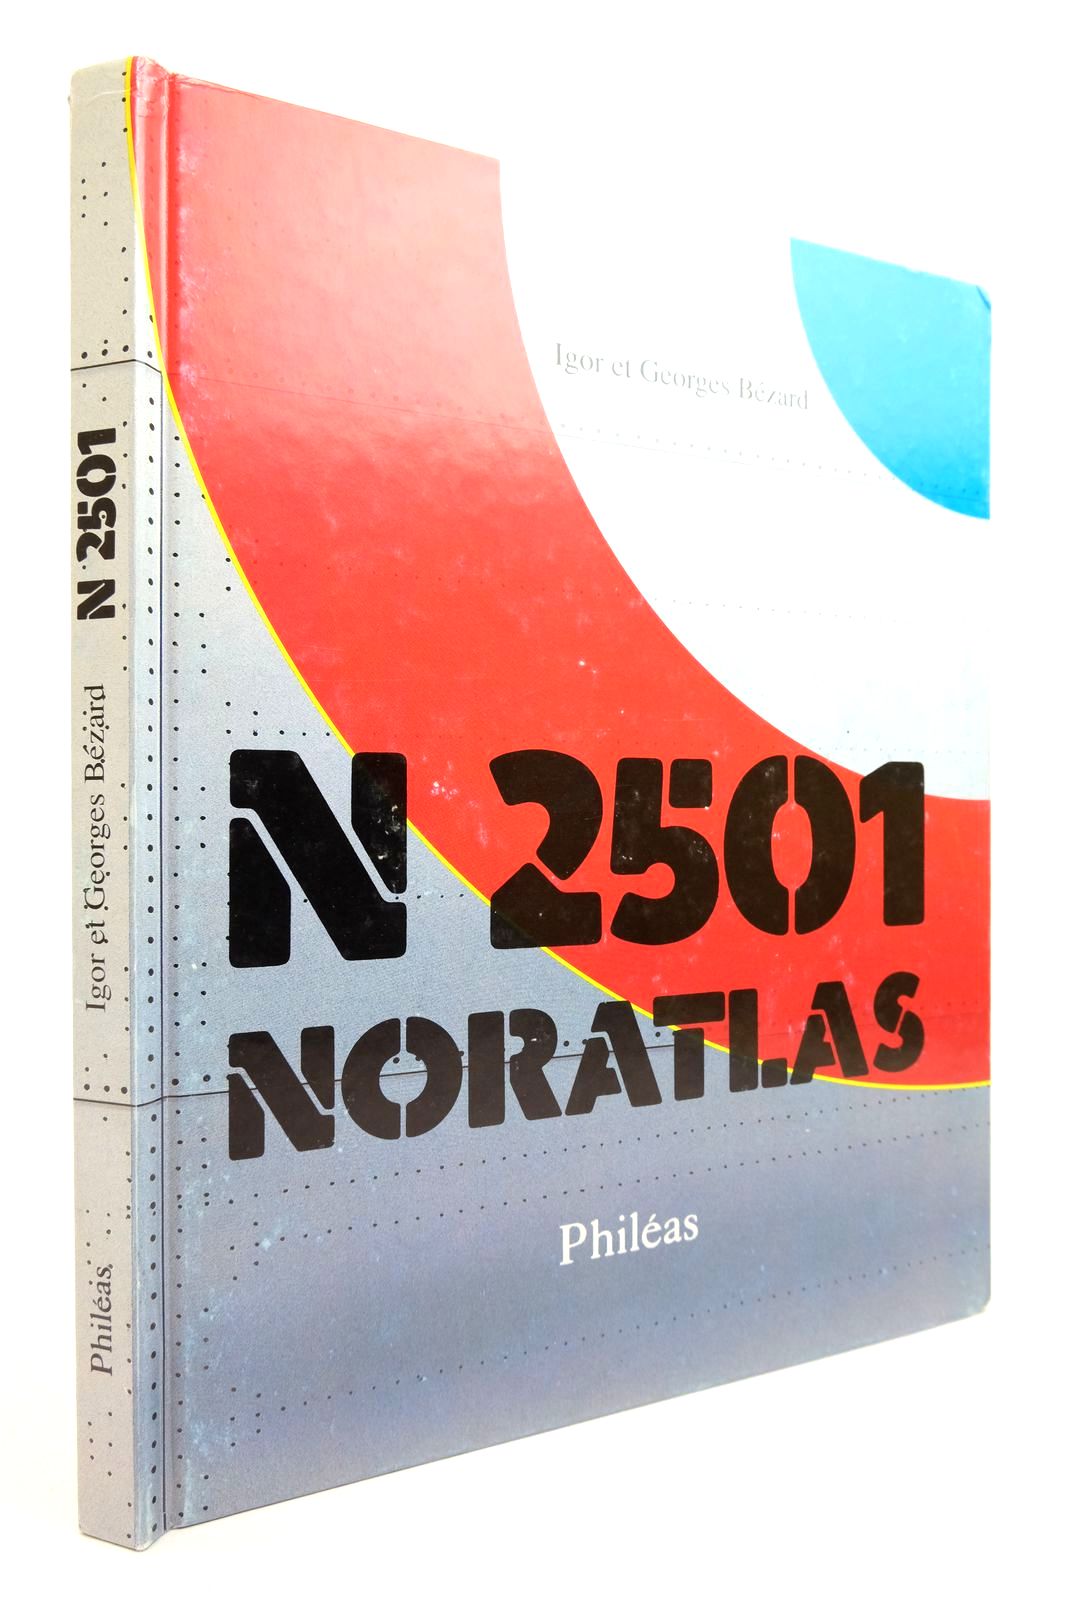 Photo of N 2501 NORATLAS written by Bezard, Igor Bezard, Georges published by Editions Phileas (STOCK CODE: 2140094)  for sale by Stella & Rose's Books